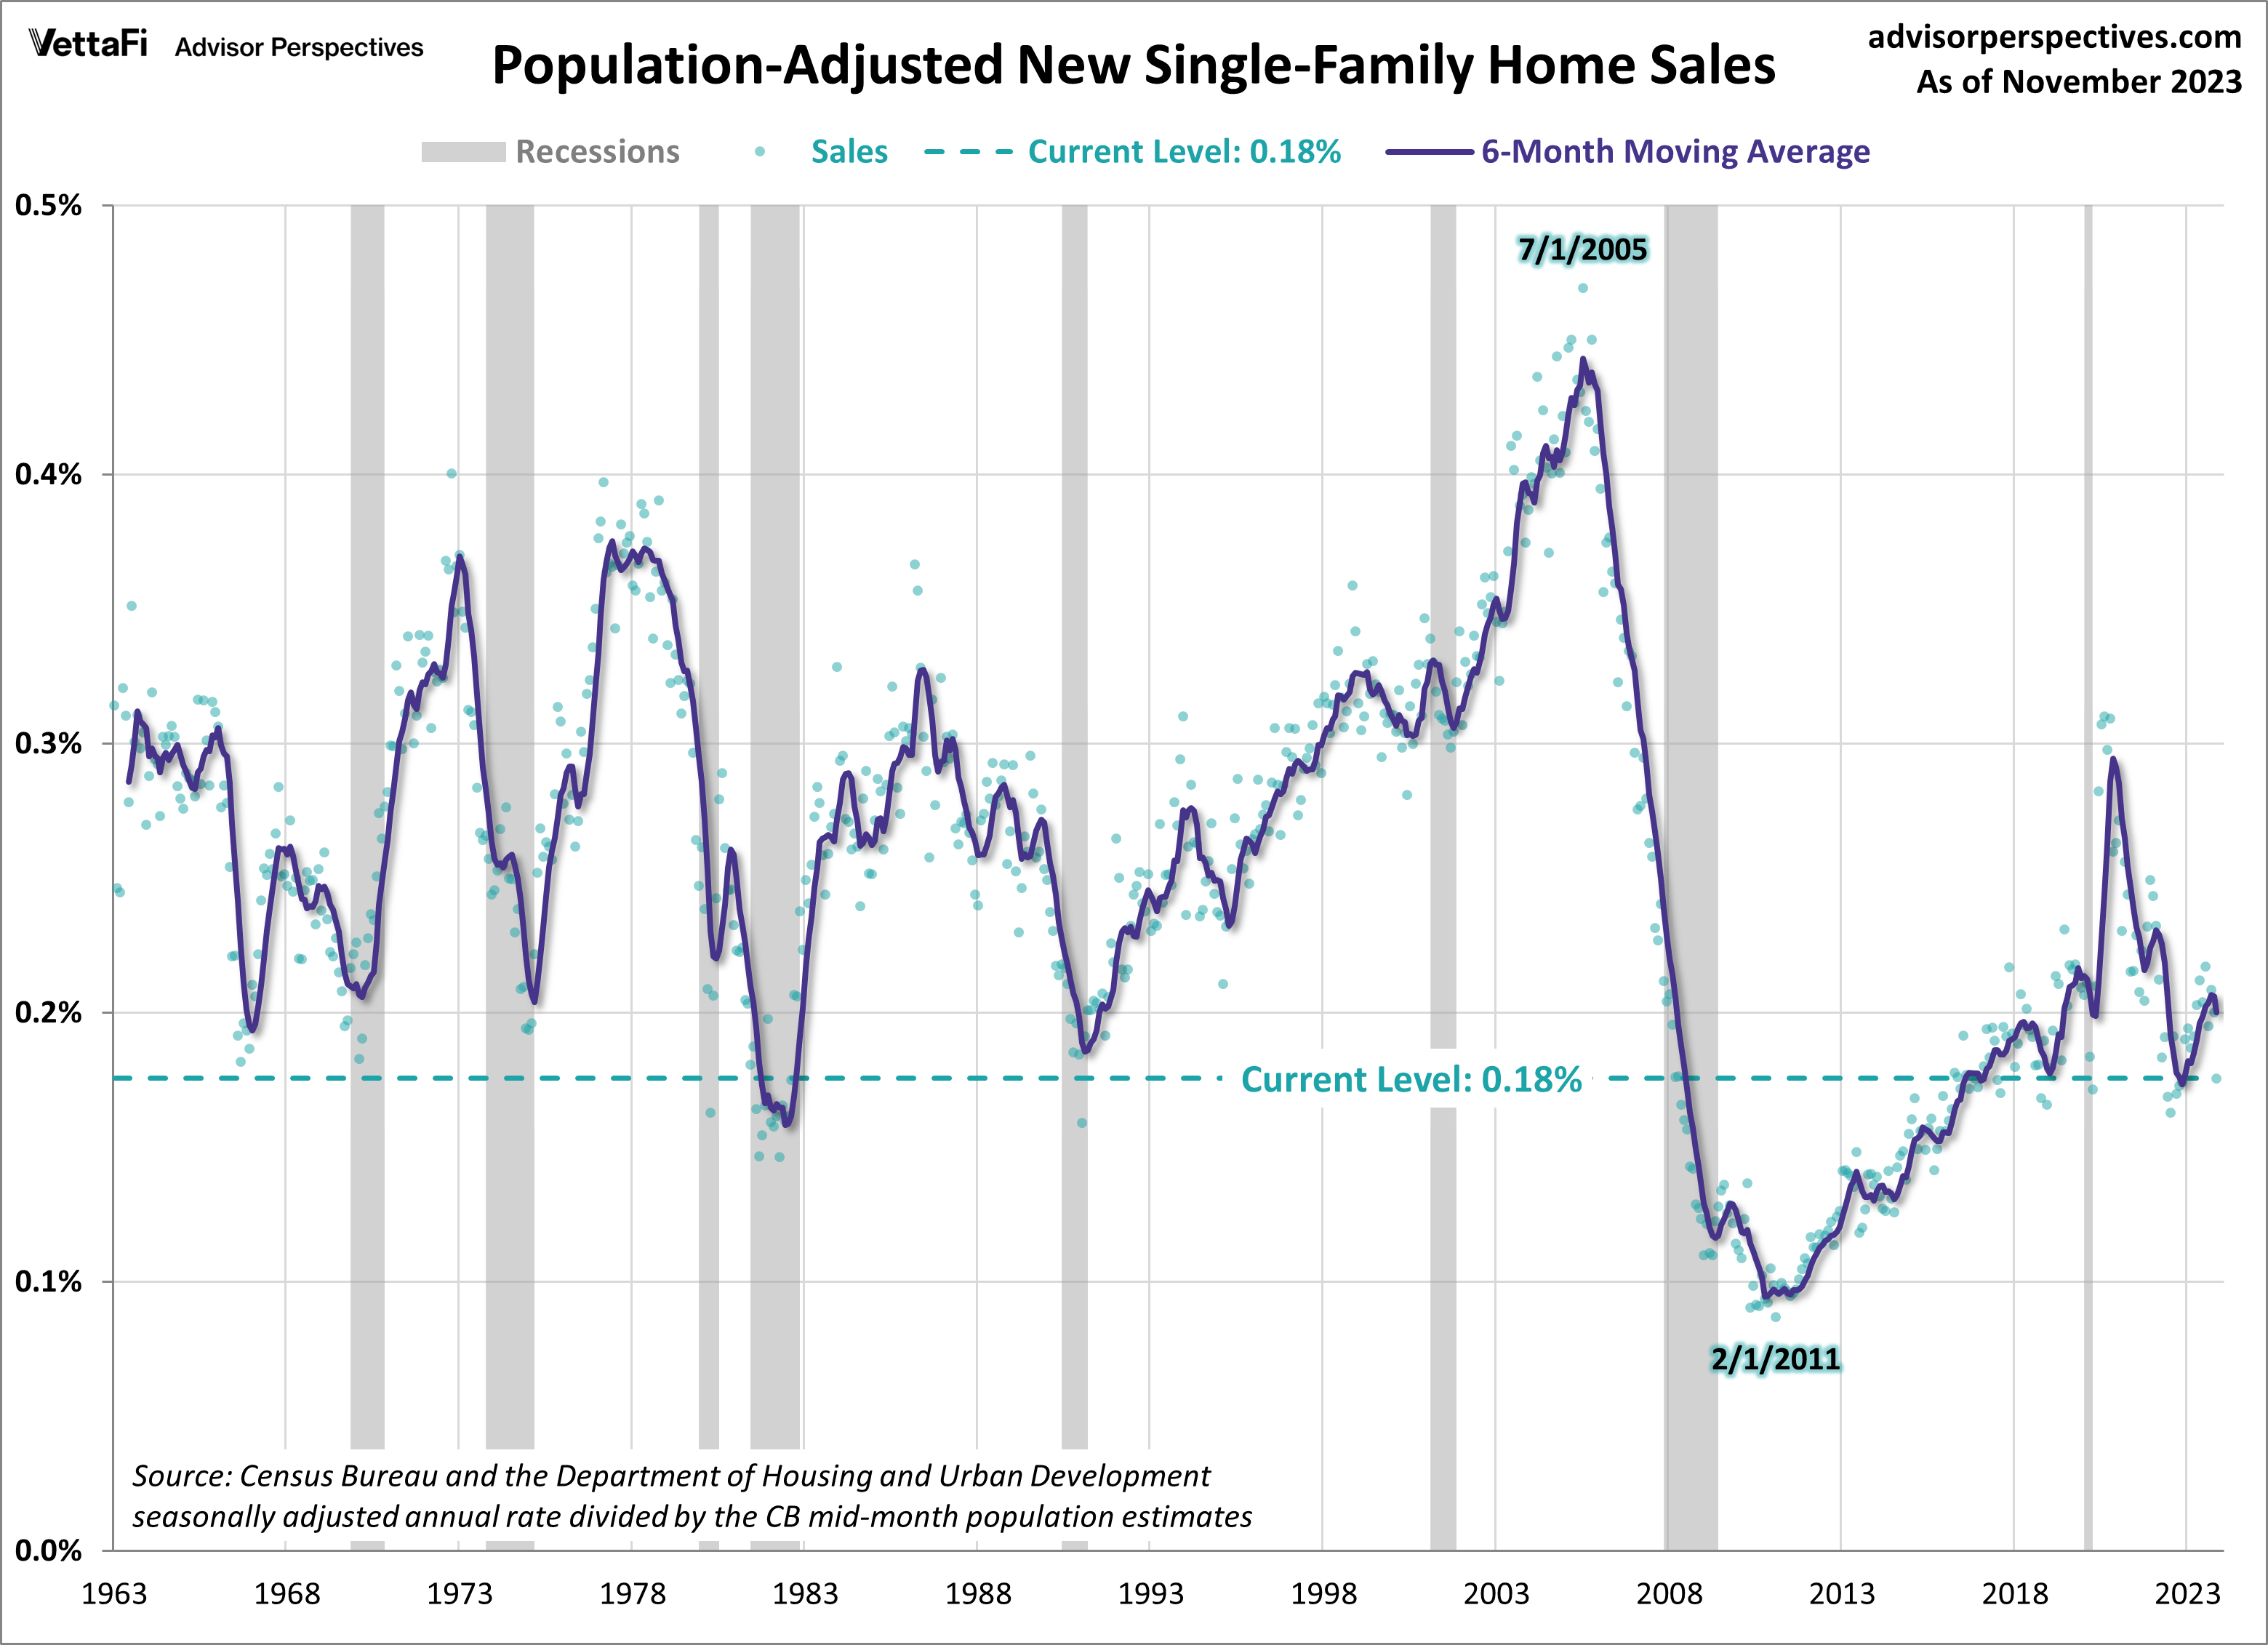 Population-Adjusted New Single-Family Home Sales